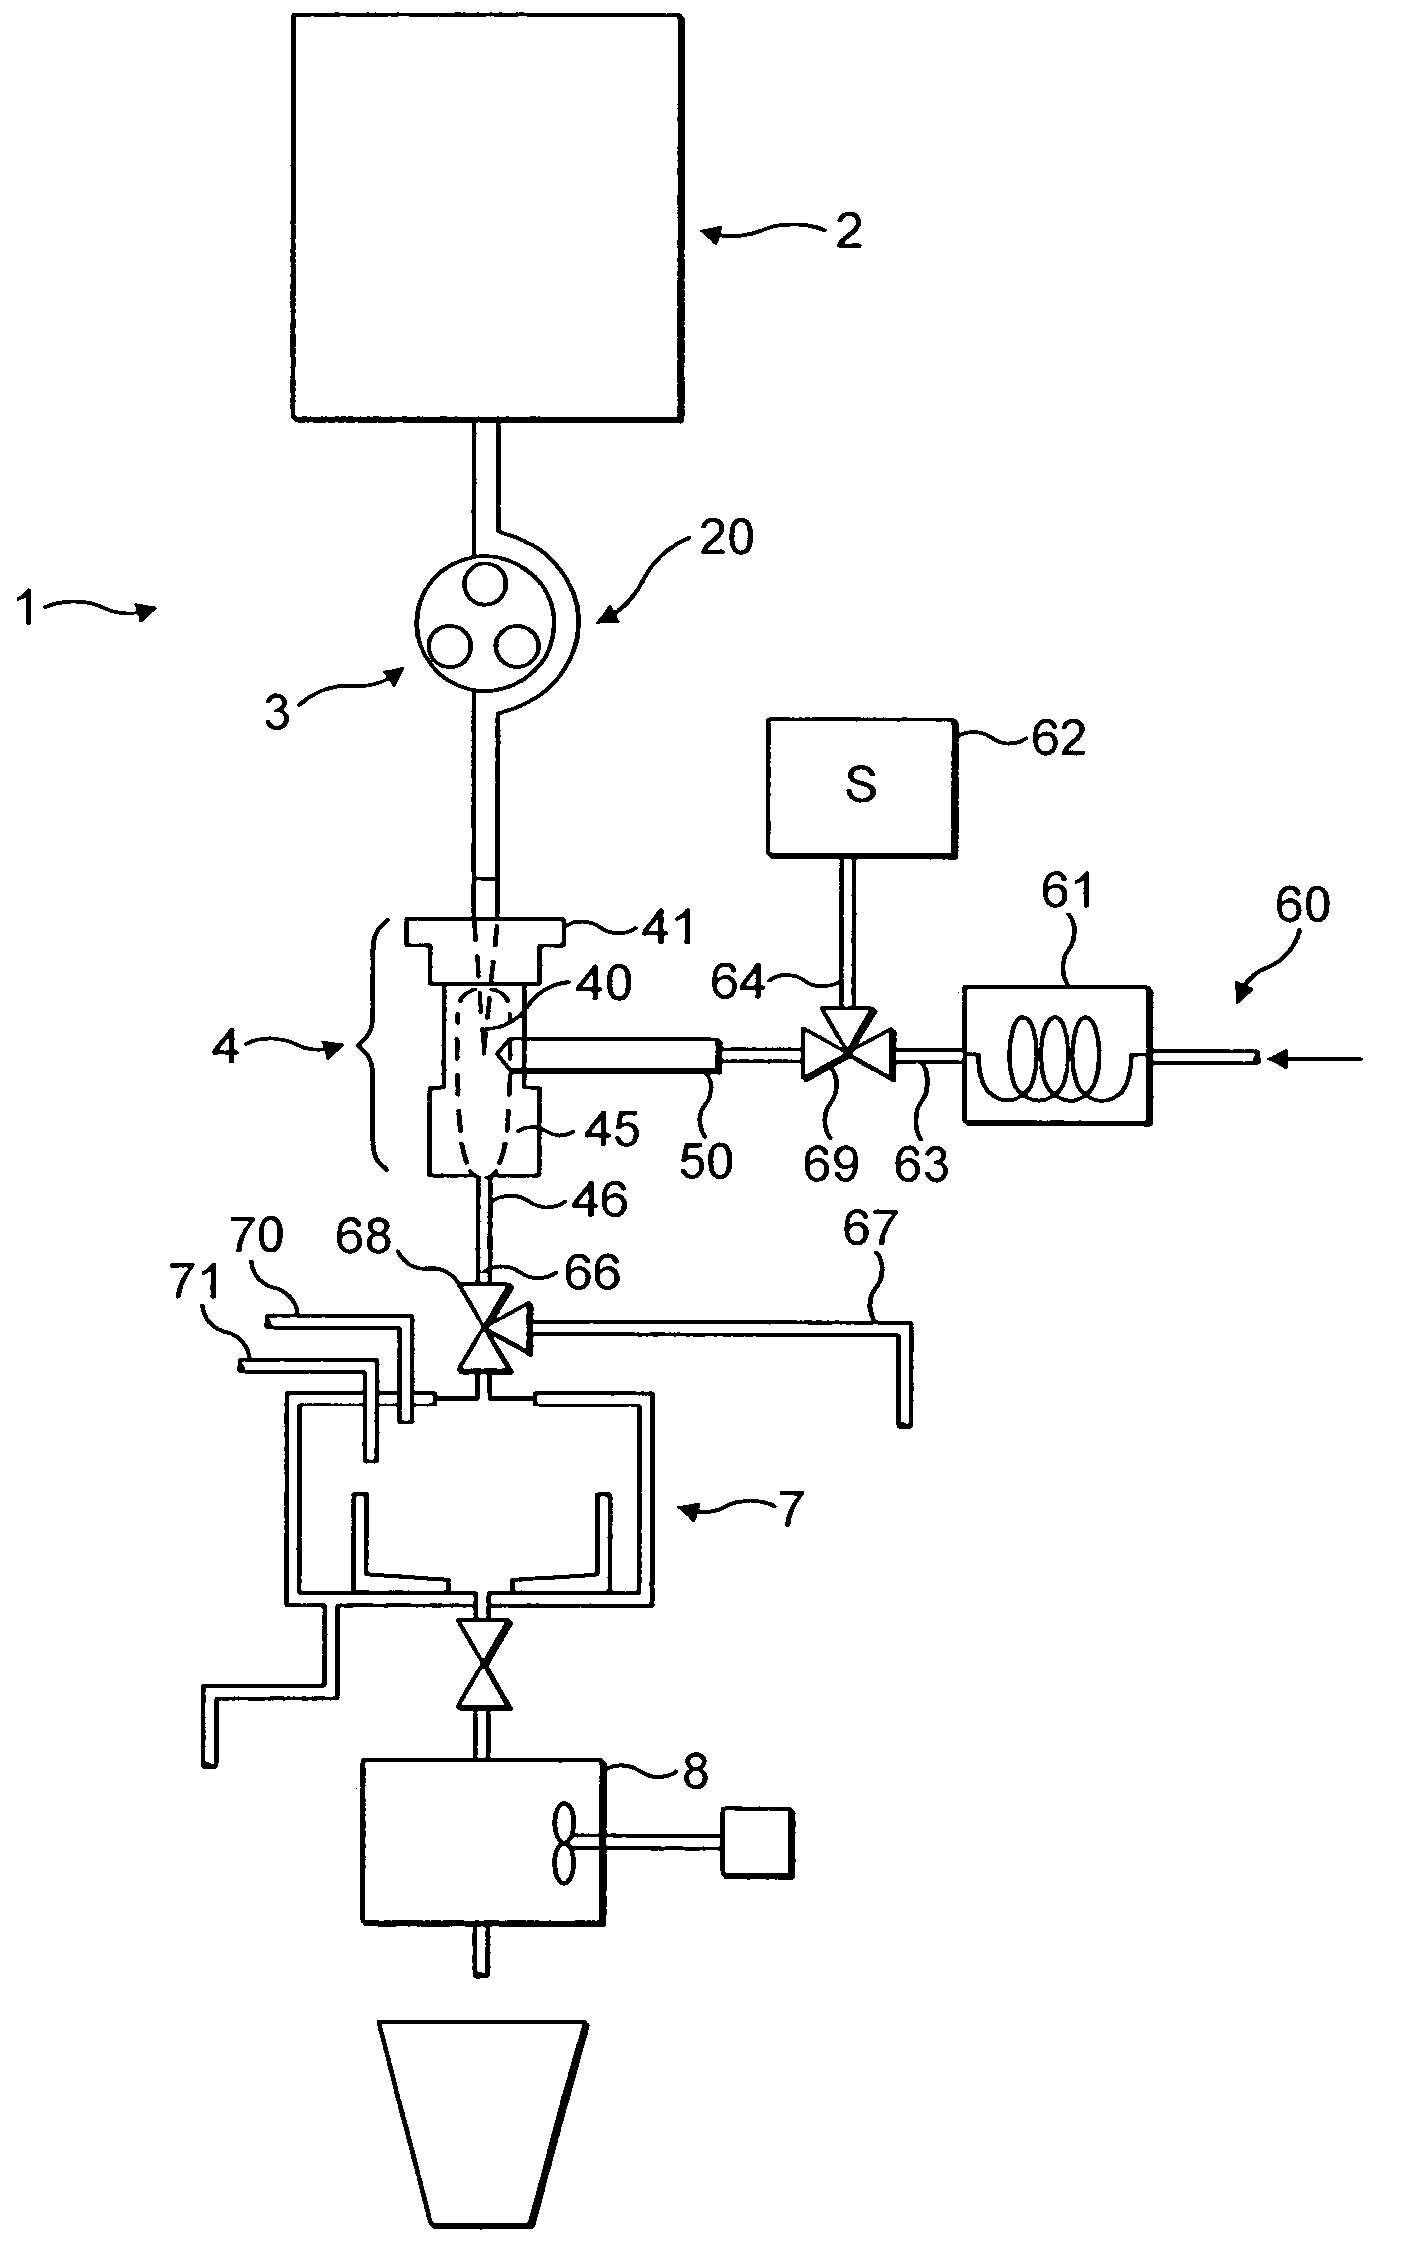 Device and method for hygienically delivering a liquid food